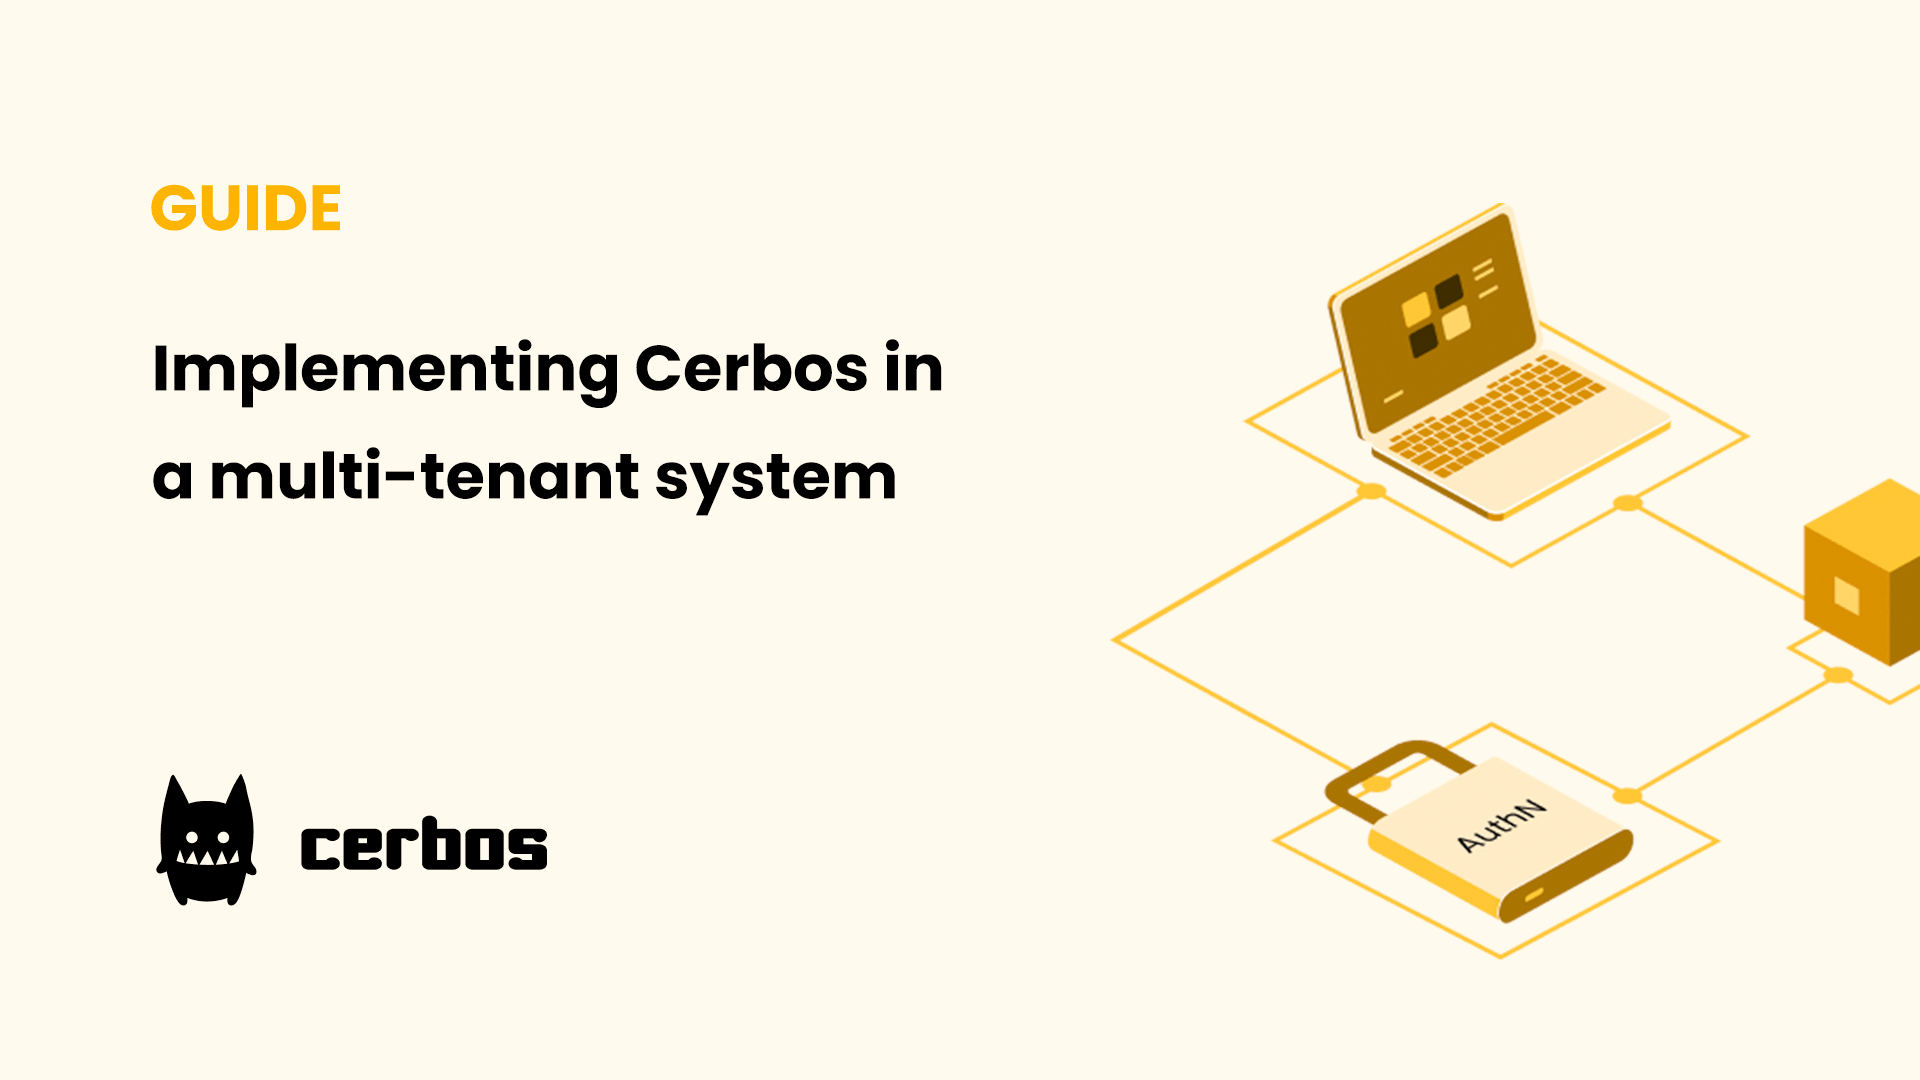 Implementing Cerbos in a multi-tenant system